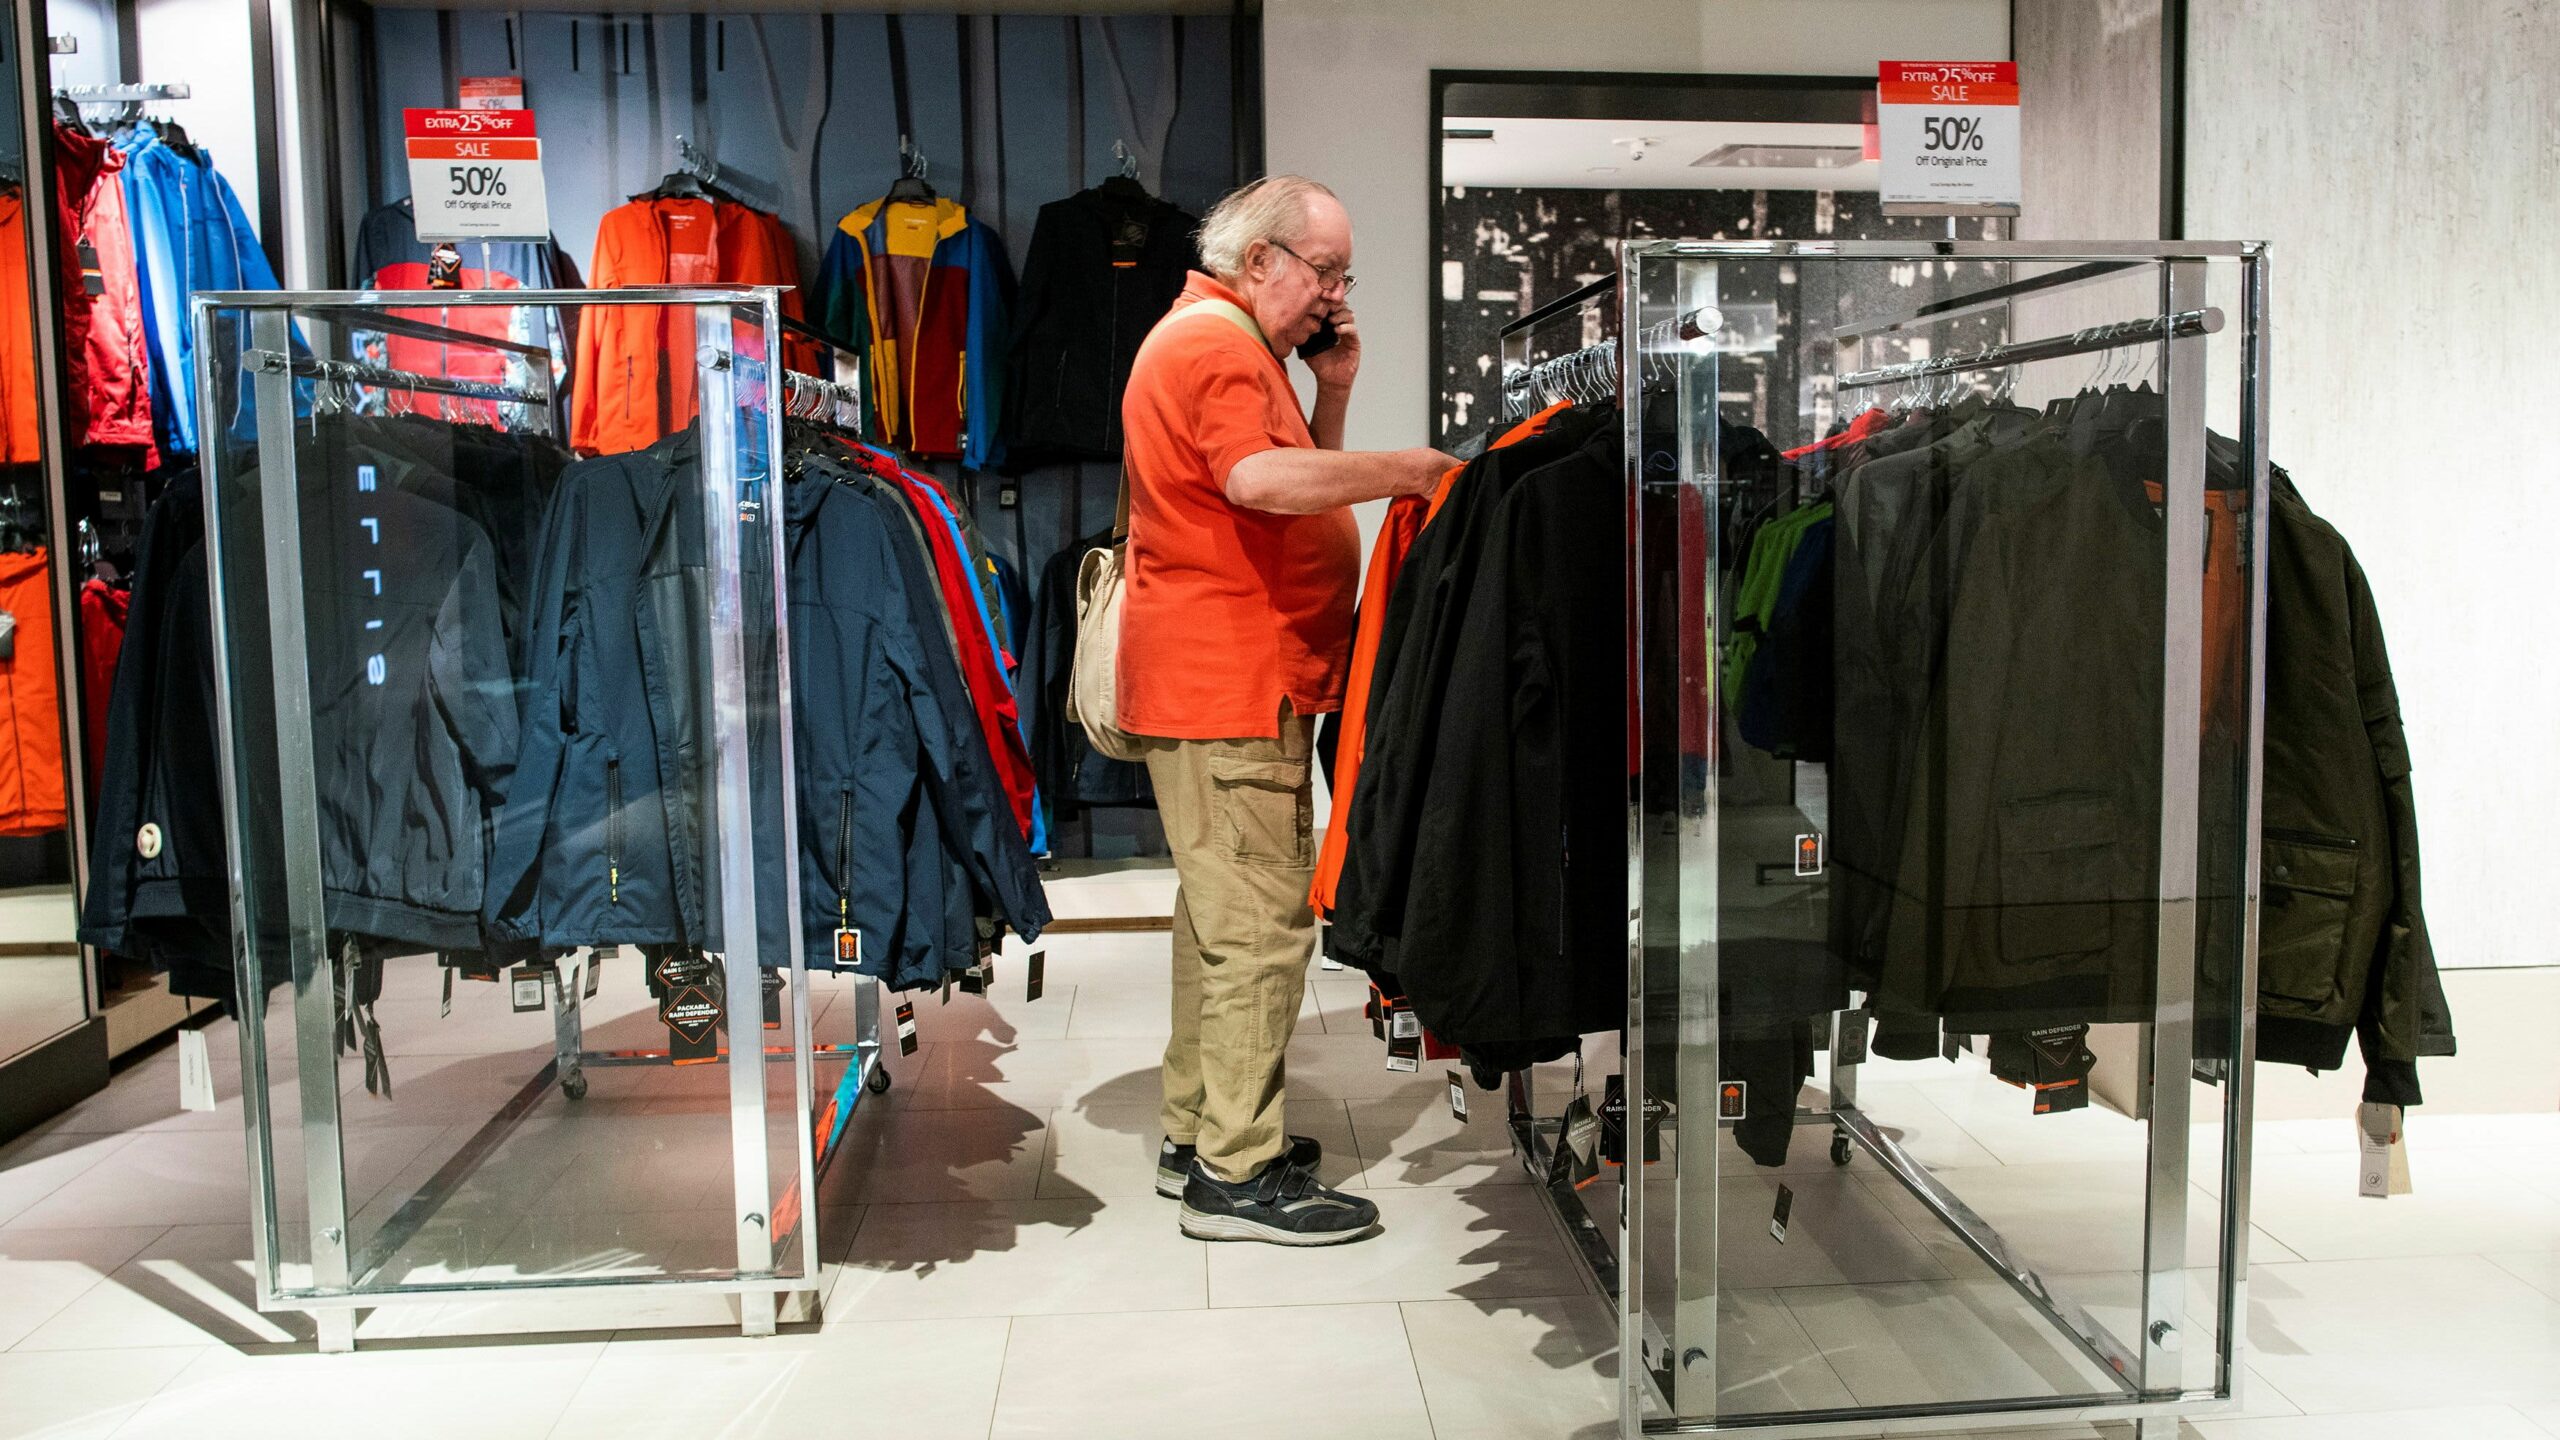 Clothing retailers flex pricing power and Wall Street is rewarding it